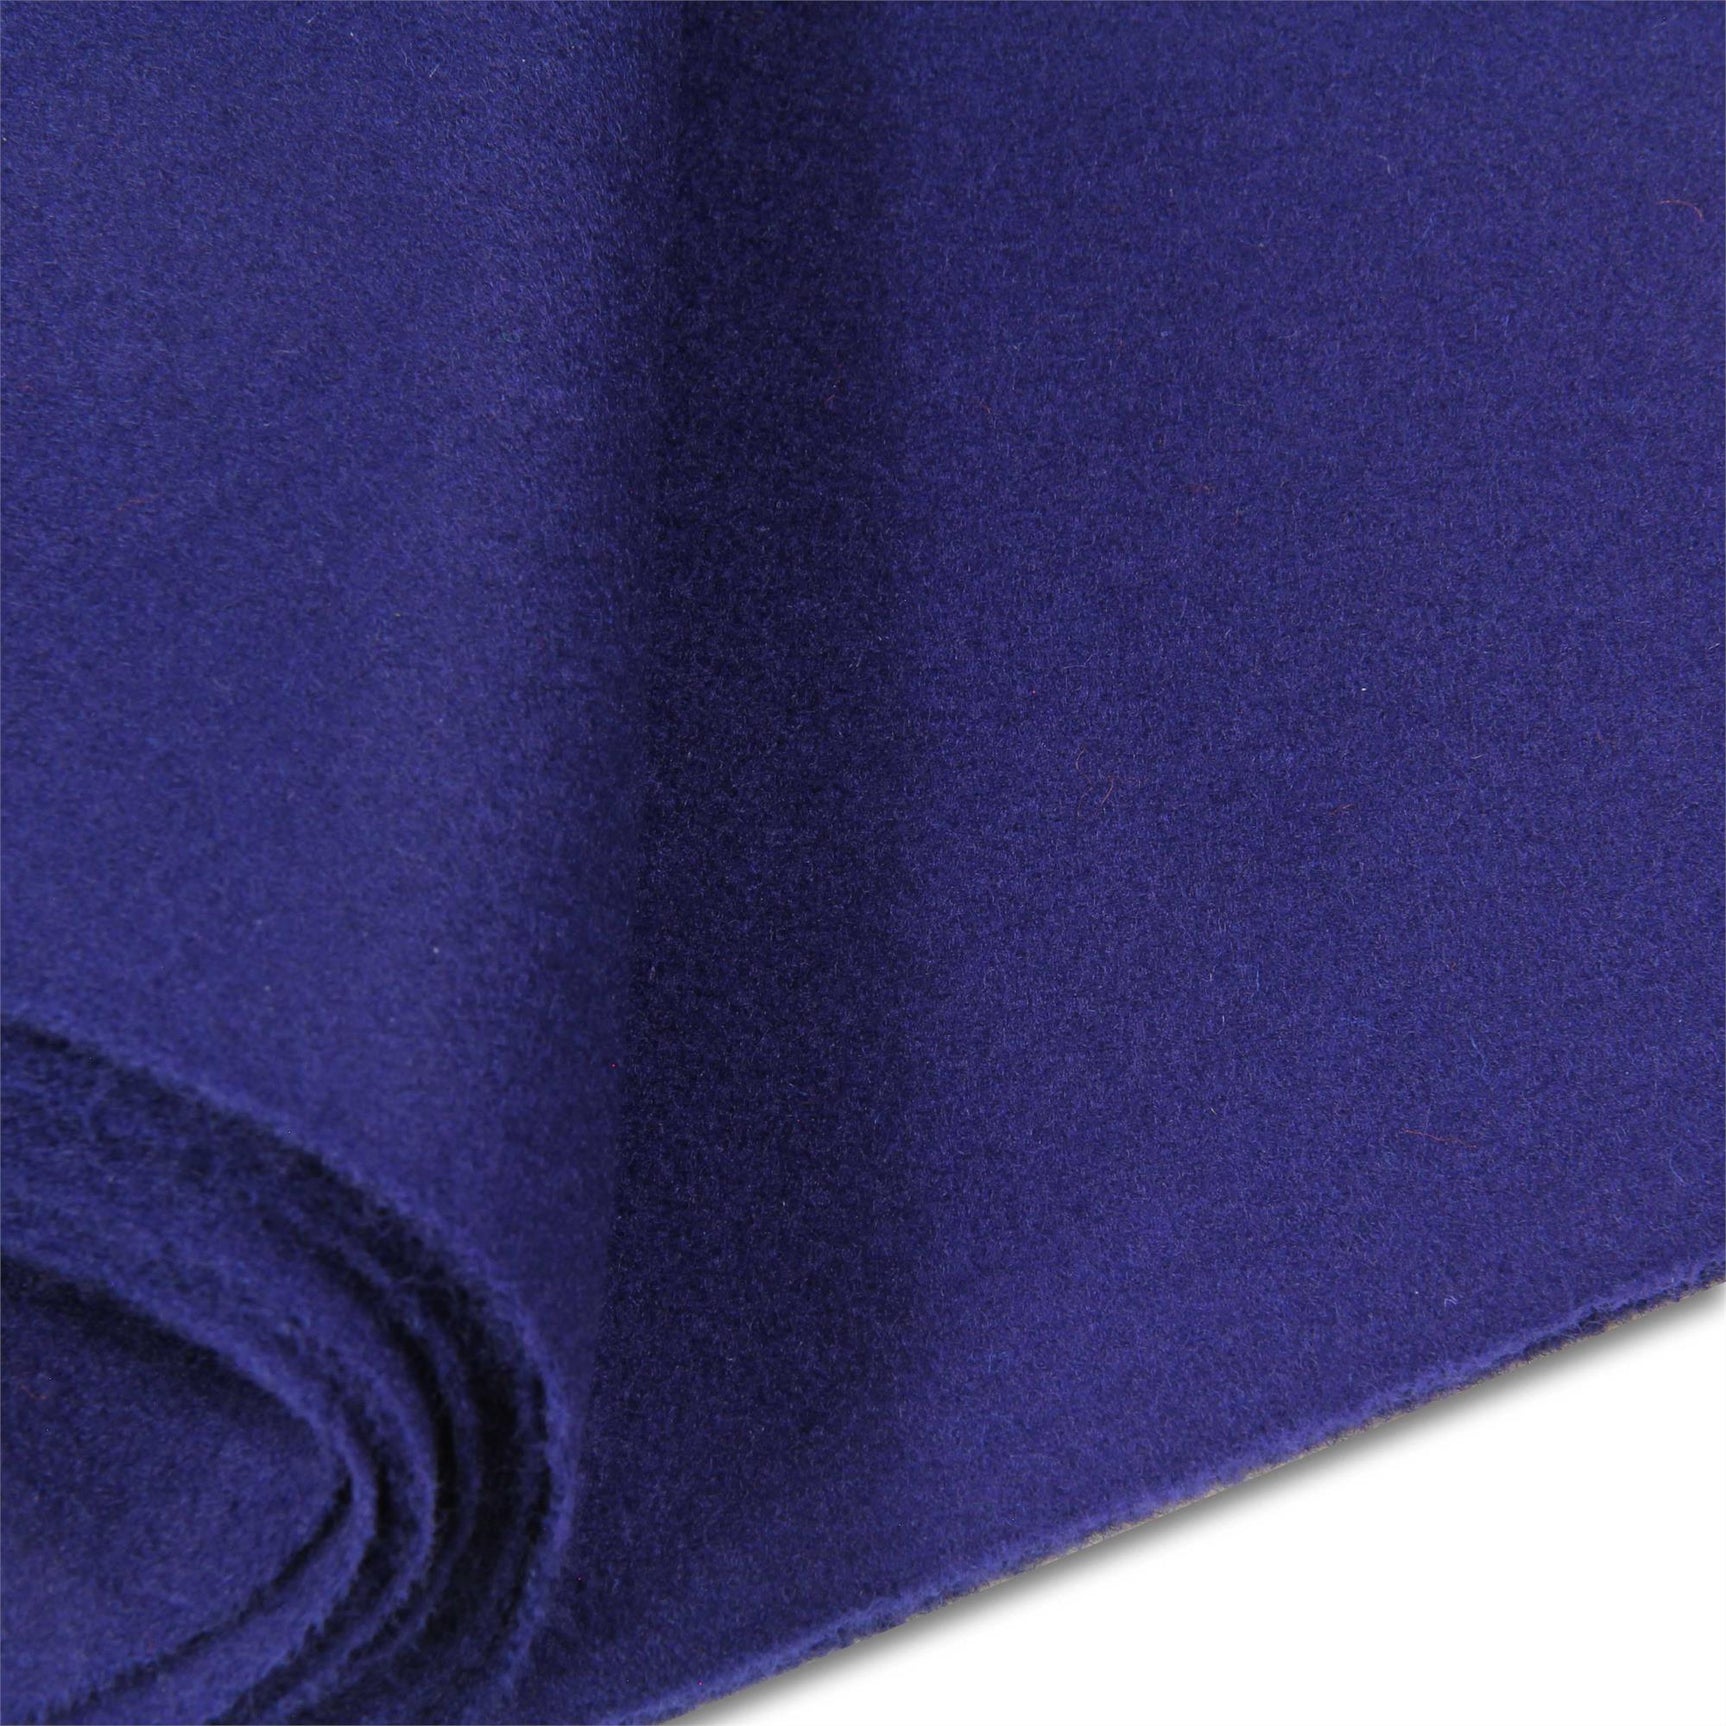 Hainsworth SMART Bed and Cushion Cloth Set for 7ft UK Pool Table FRENCH NAVY